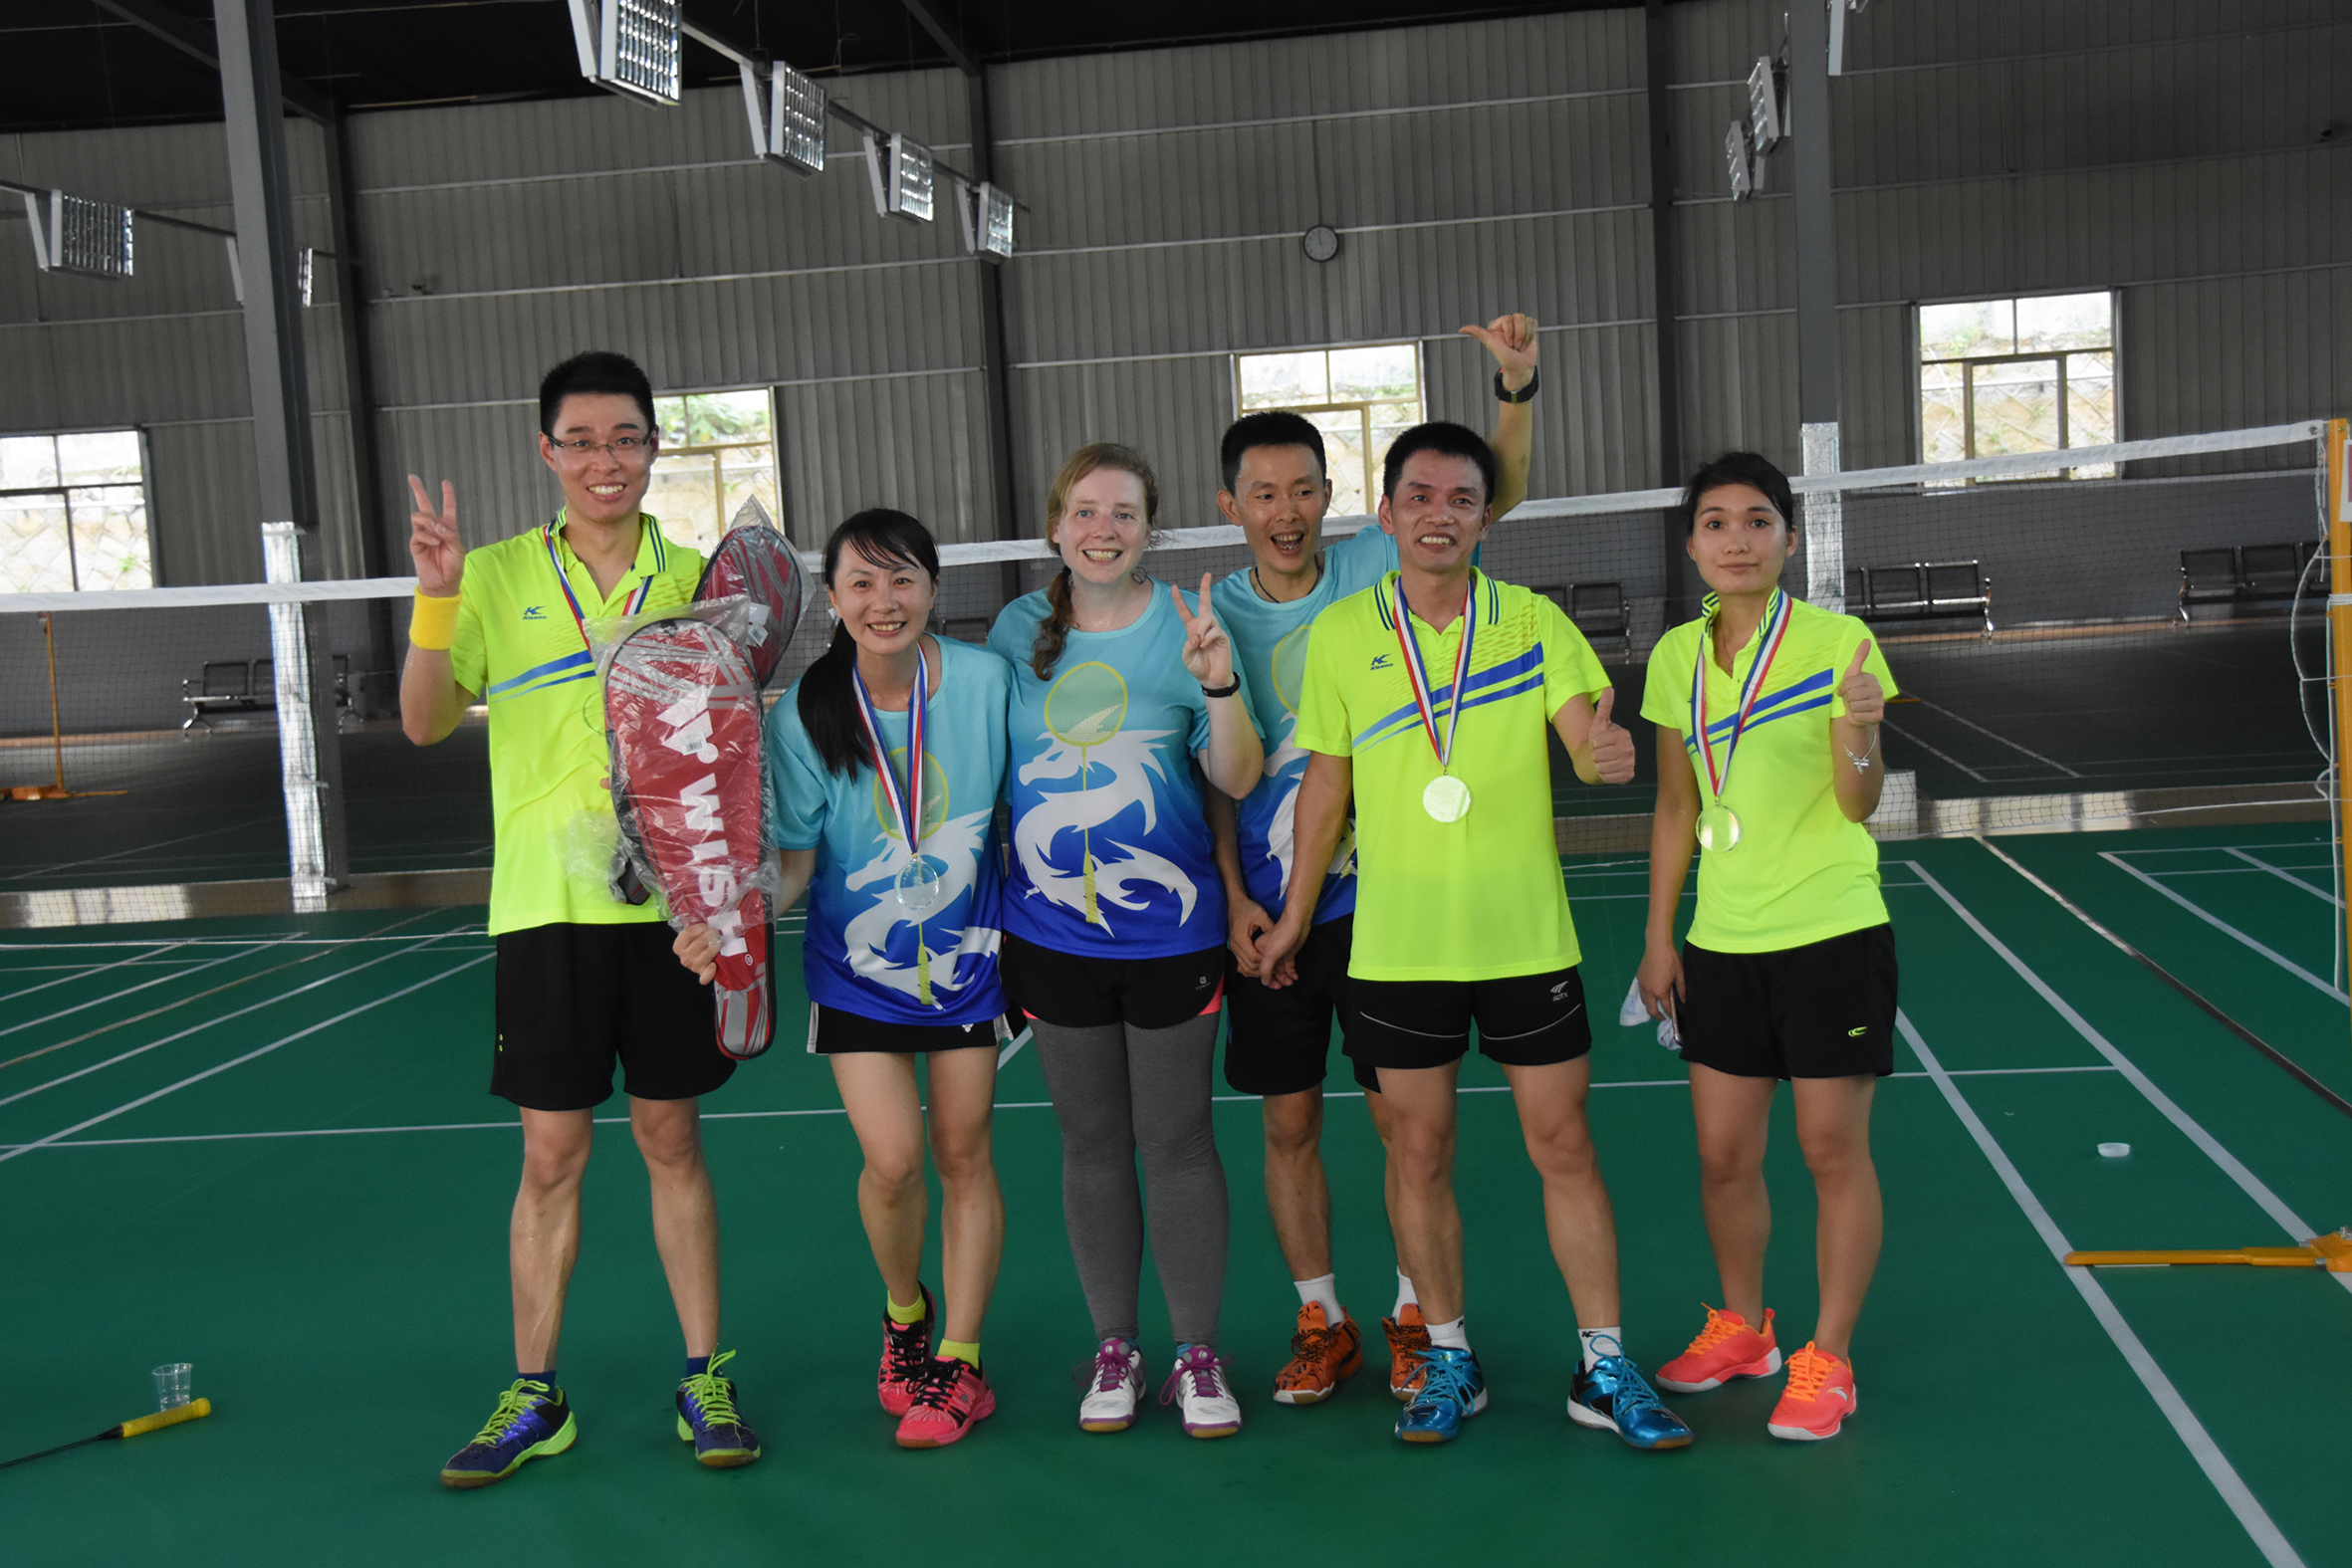 The winners of the mixed doubles was two teams I didn't know before. But notice the one woman is the same as the runner up in the womens doubles. She was the only one to get medals in two events. She was awesome and I'd like to play with her more. 